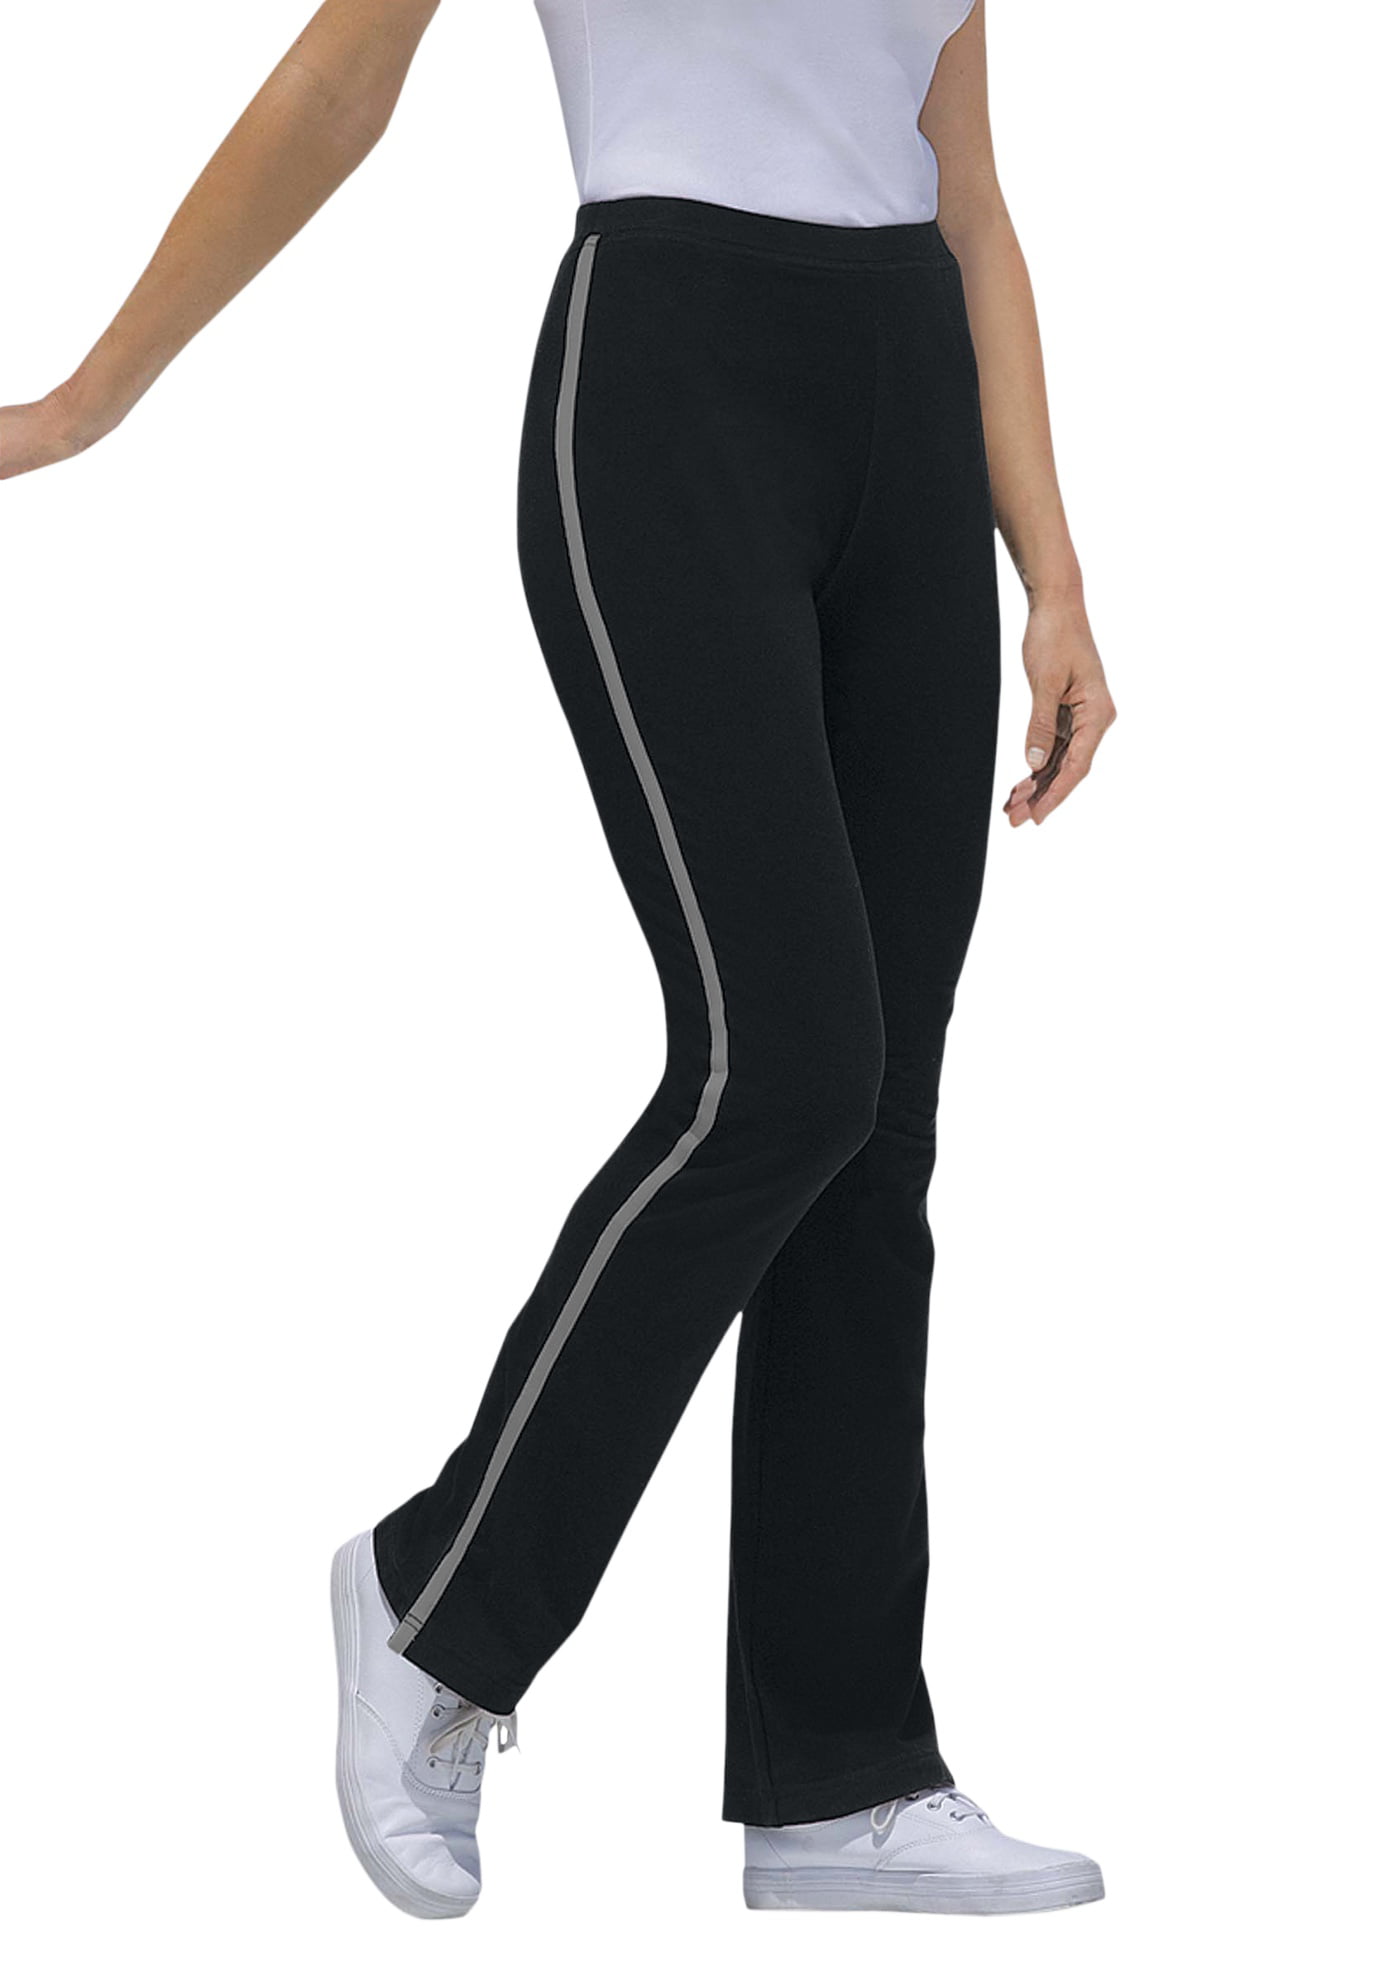  Joggers for Women Plus Size Gibobby Yoga Pants for